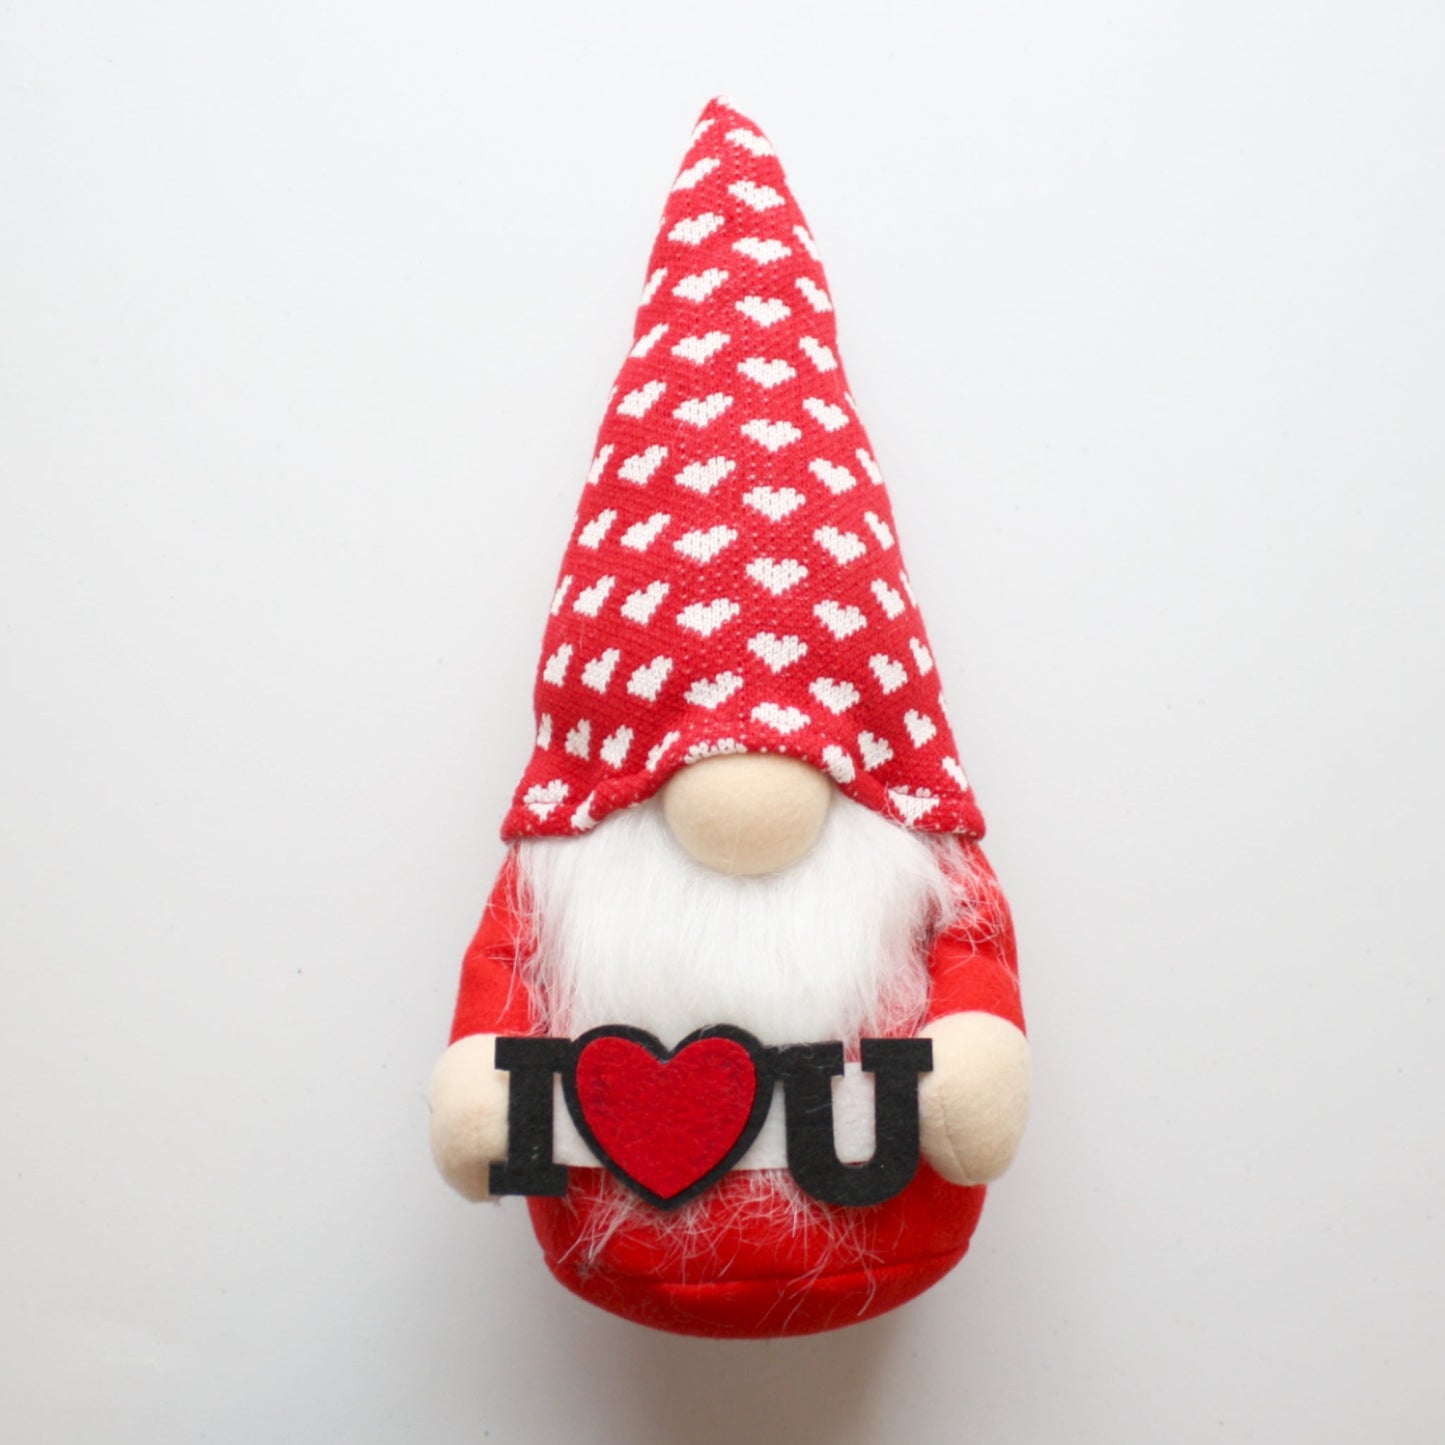 Handmade "I Love You" Gnome - Made in the USA